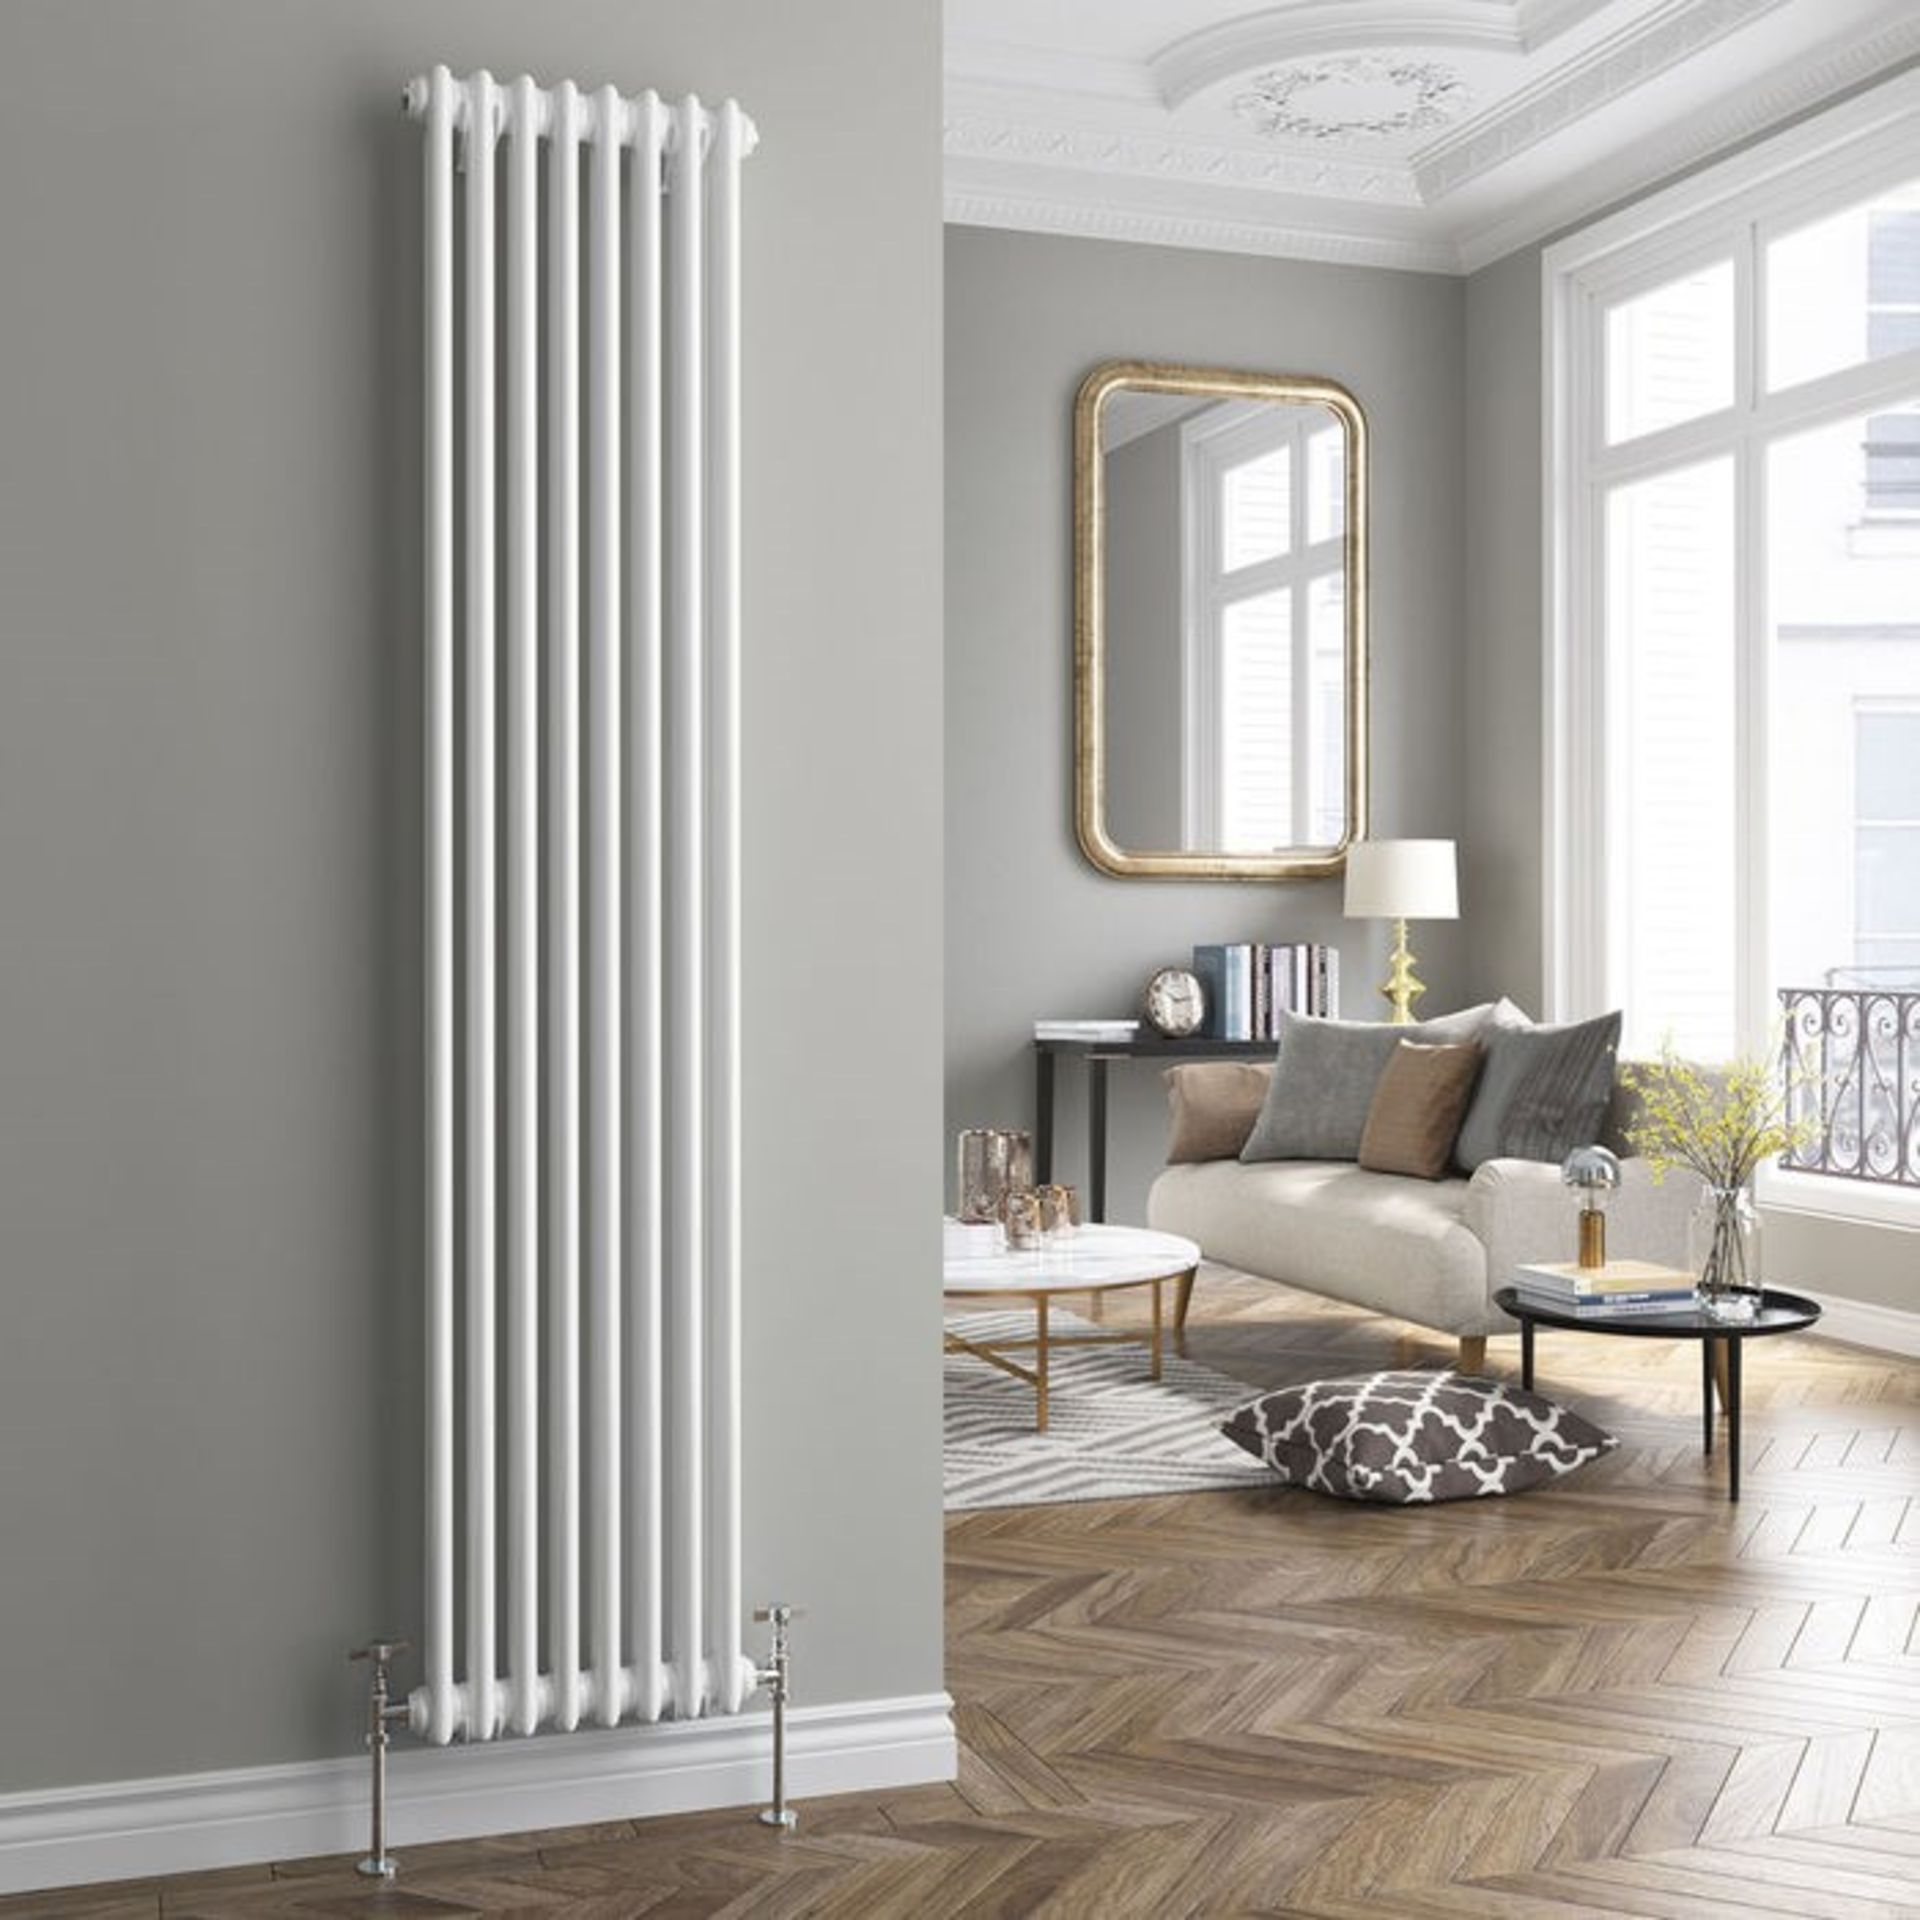 (JL83) 2000x490mm White Double Panel Vertical Colosseum Traditional Radiator. RRP £528.99.((JL83) - Image 2 of 3